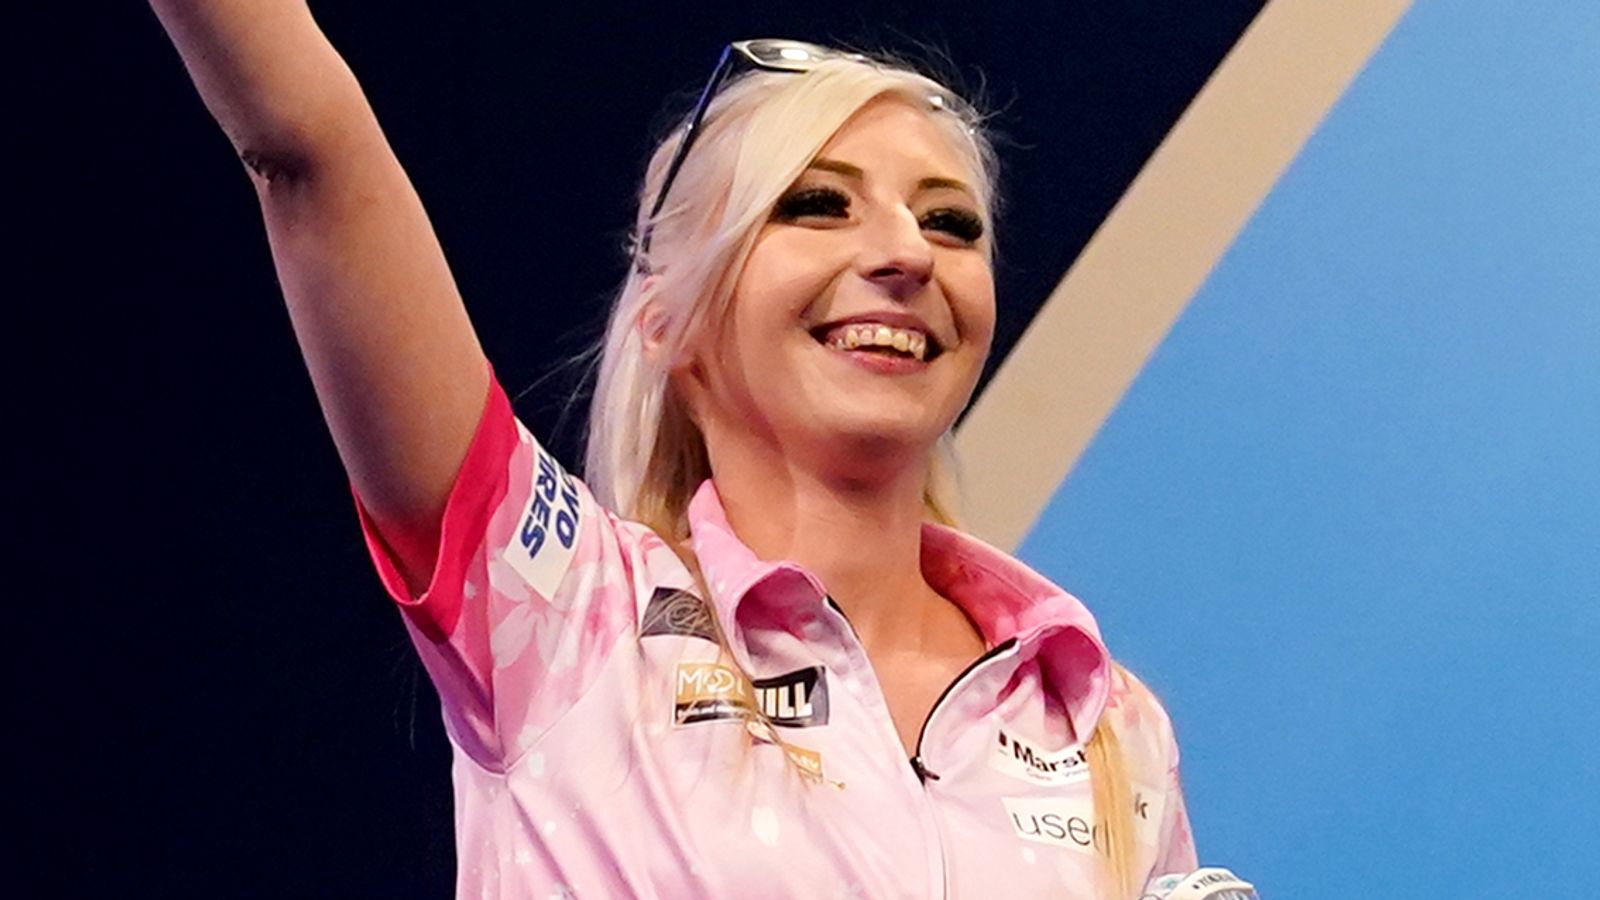 Fallon Sherrock’s popularity could justify her inclusion in 2022 Premier League Darts, says Laura Turner